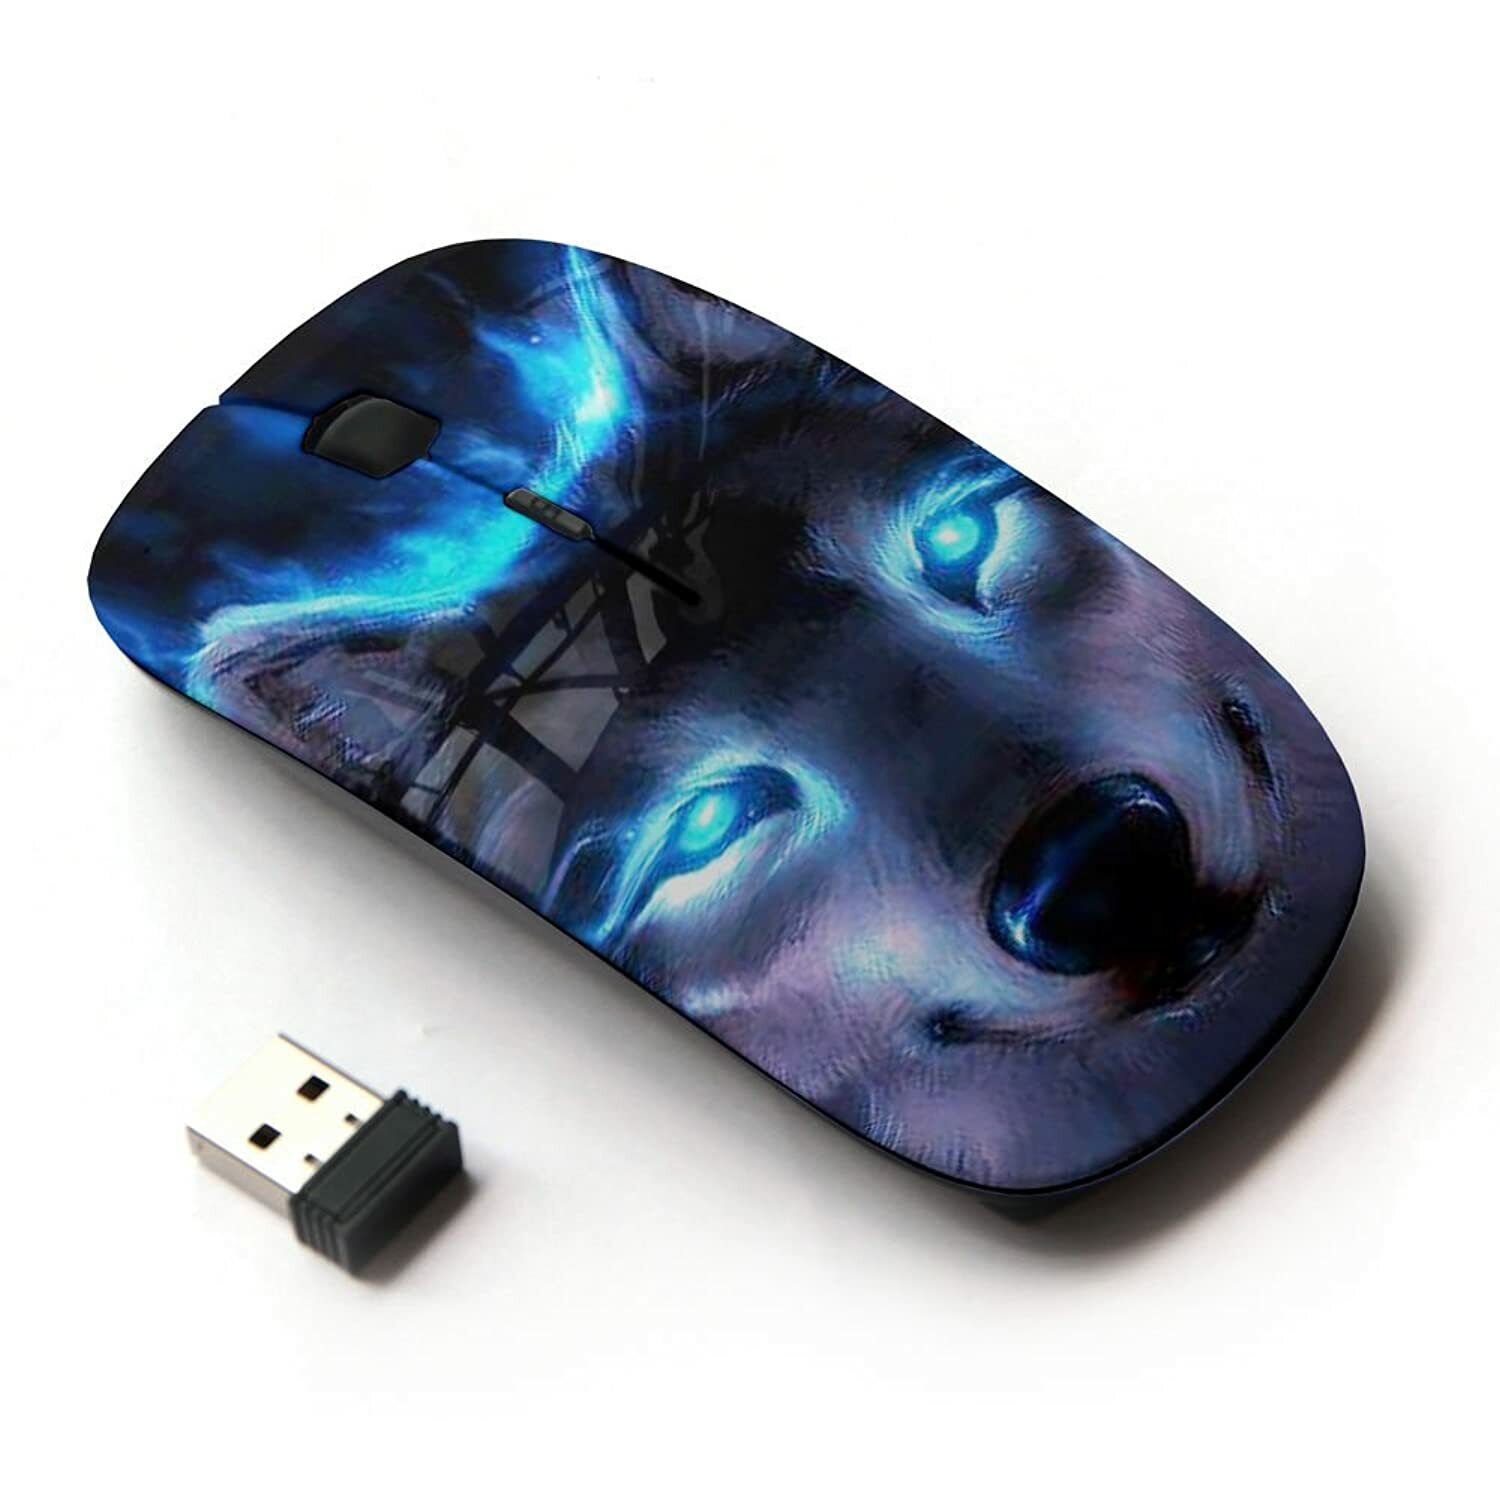 koolmouse [ optical 2.4g wireless mouse ] [ wolf blue eyes neon bright light est